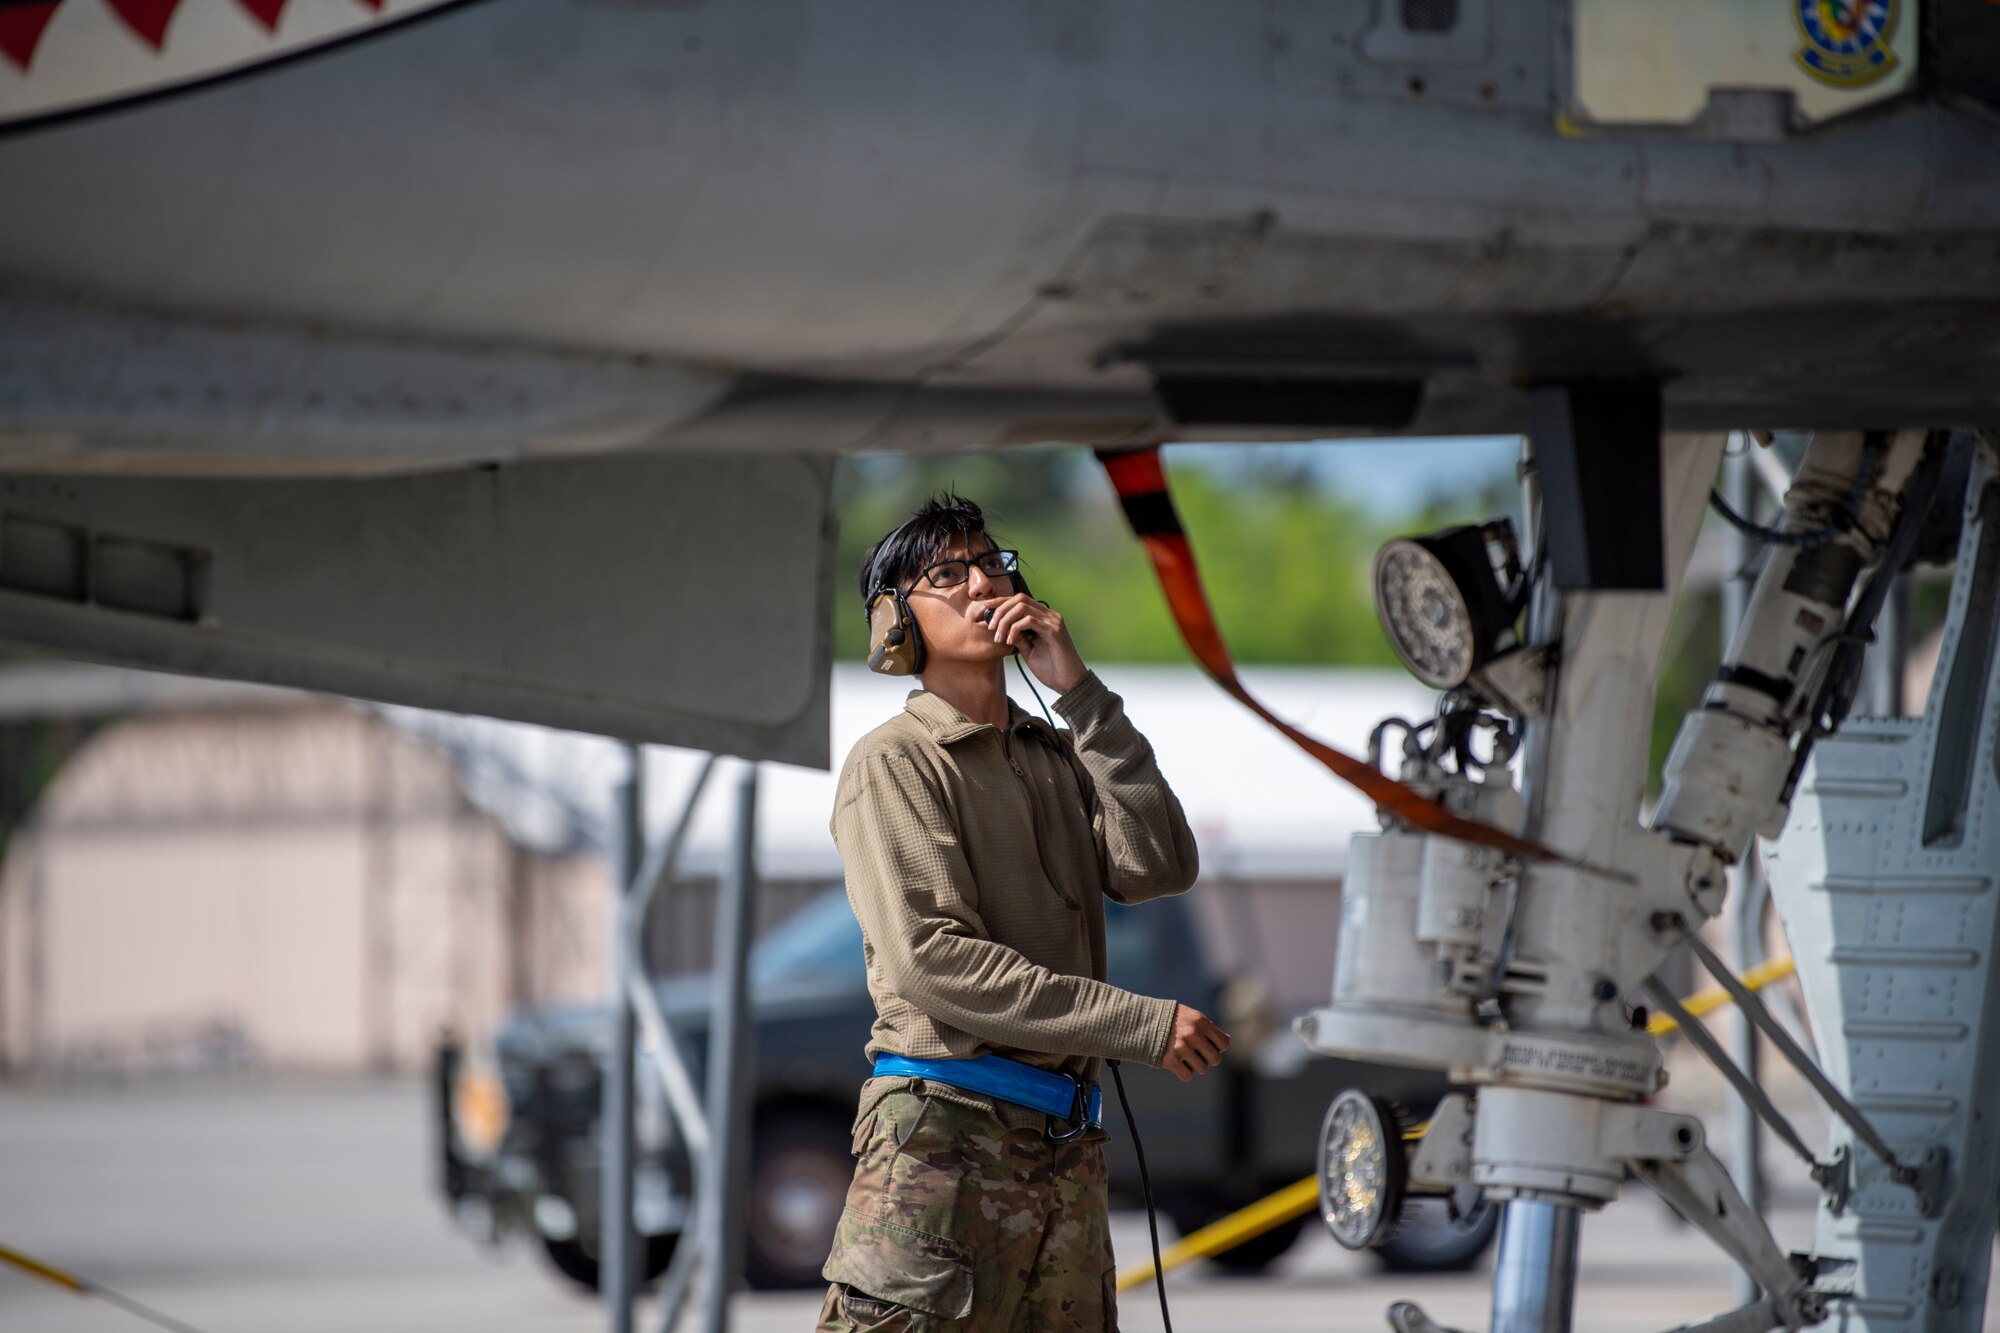 A U.S. Air Force Airman assigned to the 23rd Maintenance Group prepares an A-10C Thunderbolt II for take-off during Exercise Ready Tiger 24-1 at Moody Air Force Base, Georgia, April 9, 2024. The group oversees the 23rd Wing's maintenance training program and ensures the workforce qualification and capability for worldwide development of personnel and cargo. During Ready Tiger 24-1, exercise inspectors will assess the 23rd Wing's proficiency in employing decentralized command and control to fulfil air tasking orders across geographically dispersed areas amid communication challenges, integrating Agile Combat Employment principles such as integrated combat turns, forward aerial refuelling points, multi-capable Airmen, and combat search and rescue capabilities. (U.S. Air Force photo by 2nd Lt. Benjamin Williams)